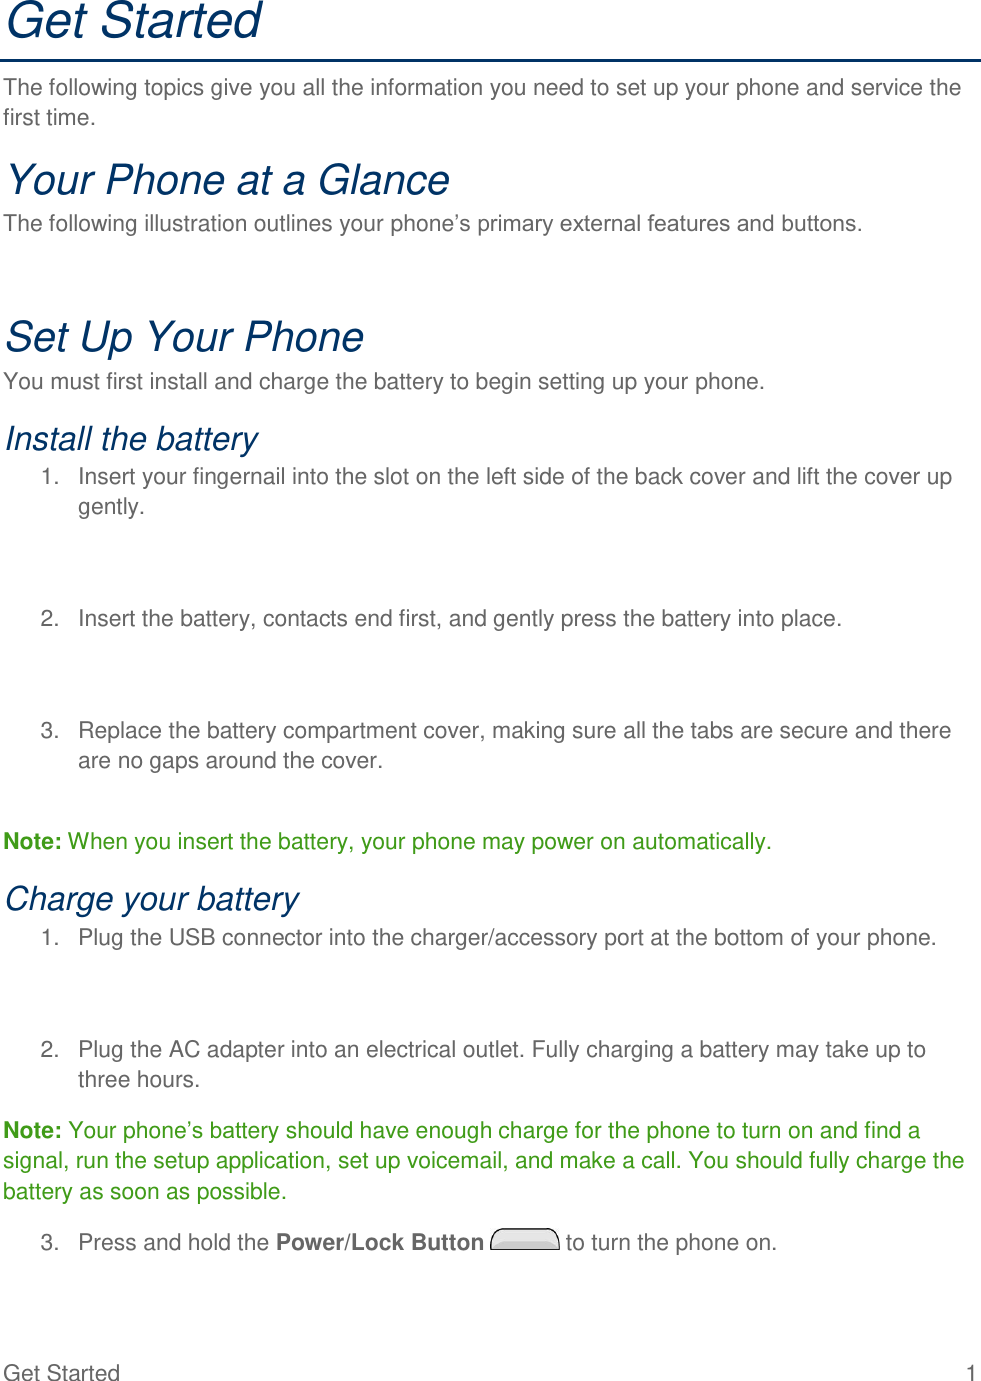 Get Started  1 Get Started The following topics give you all the information you need to set up your phone and service the first time. Your Phone at a Glance The following illustration outlines your phone‘s primary external features and buttons.  Set Up Your Phone You must first install and charge the battery to begin setting up your phone. Install the battery 1.  Insert your fingernail into the slot on the left side of the back cover and lift the cover up gently.   2.  Insert the battery, contacts end first, and gently press the battery into place.   3.  Replace the battery compartment cover, making sure all the tabs are secure and there are no gaps around the cover.  Note: When you insert the battery, your phone may power on automatically. Charge your battery 1.  Plug the USB connector into the charger/accessory port at the bottom of your phone.   2.  Plug the AC adapter into an electrical outlet. Fully charging a battery may take up to three hours. Note: Your phone‘s battery should have enough charge for the phone to turn on and find a signal, run the setup application, set up voicemail, and make a call. You should fully charge the battery as soon as possible. 3.  Press and hold the Power/Lock Button   to turn the phone on. 